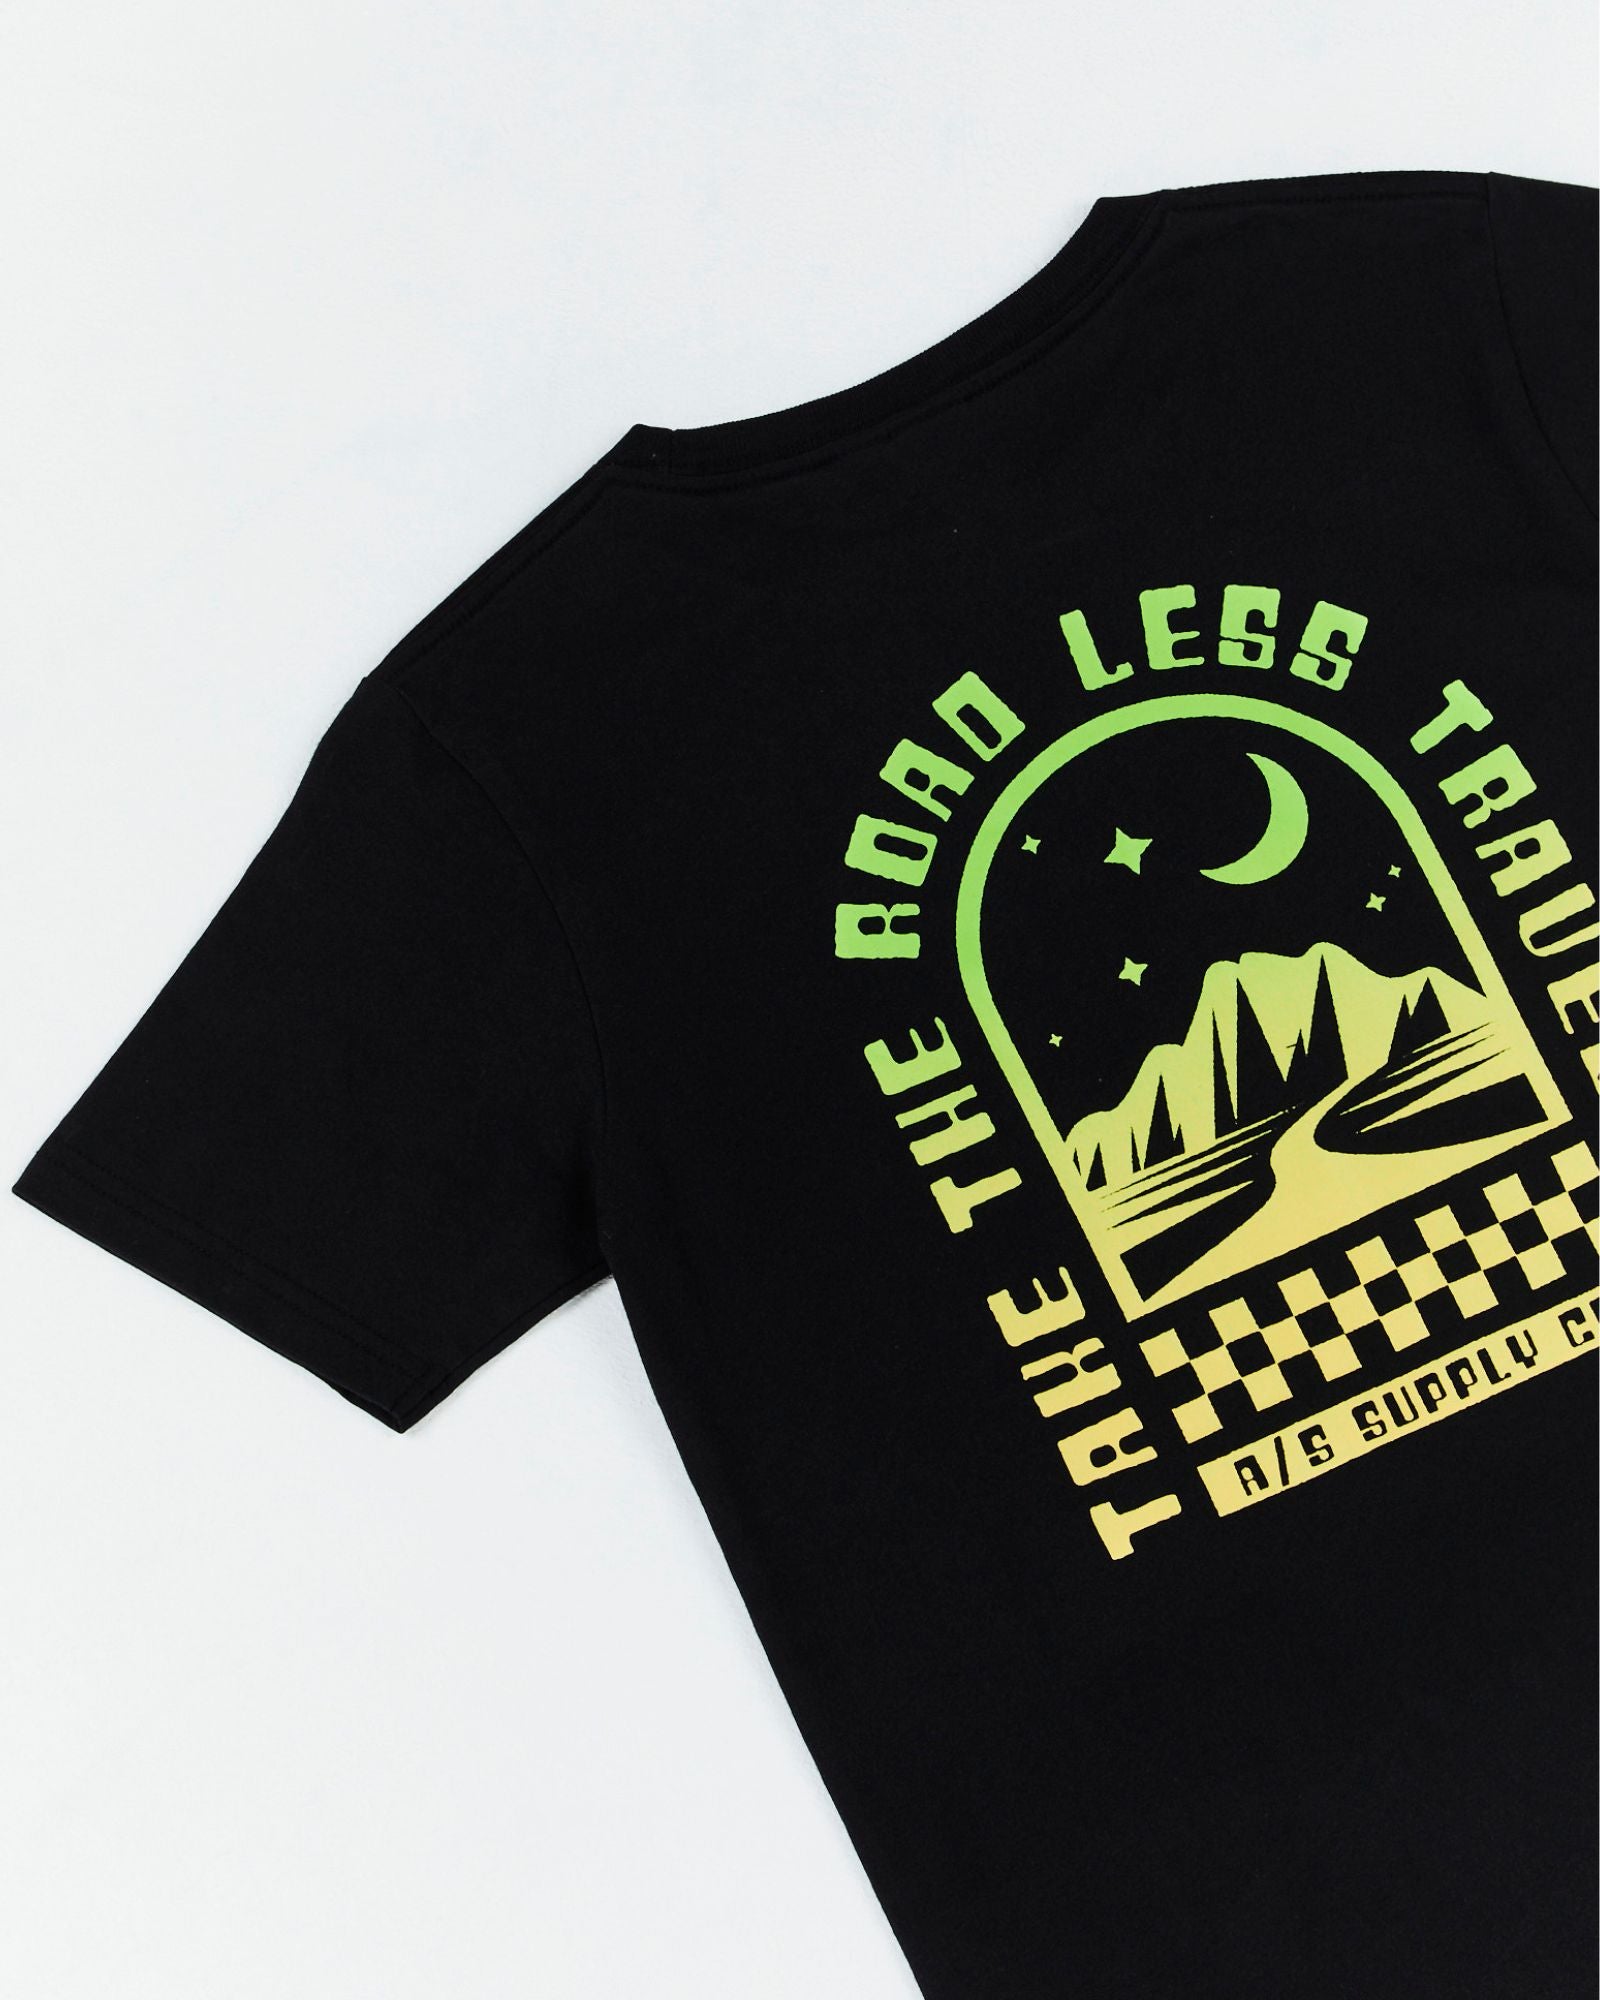 Alphabet Soup's Teen Mystical Tee in washed black cotton jersey for boys ages 8-16. Featuring a rad print “Take The Road Less Travelled” design on front and back, short sleeves, crew neck, and straight hemline.